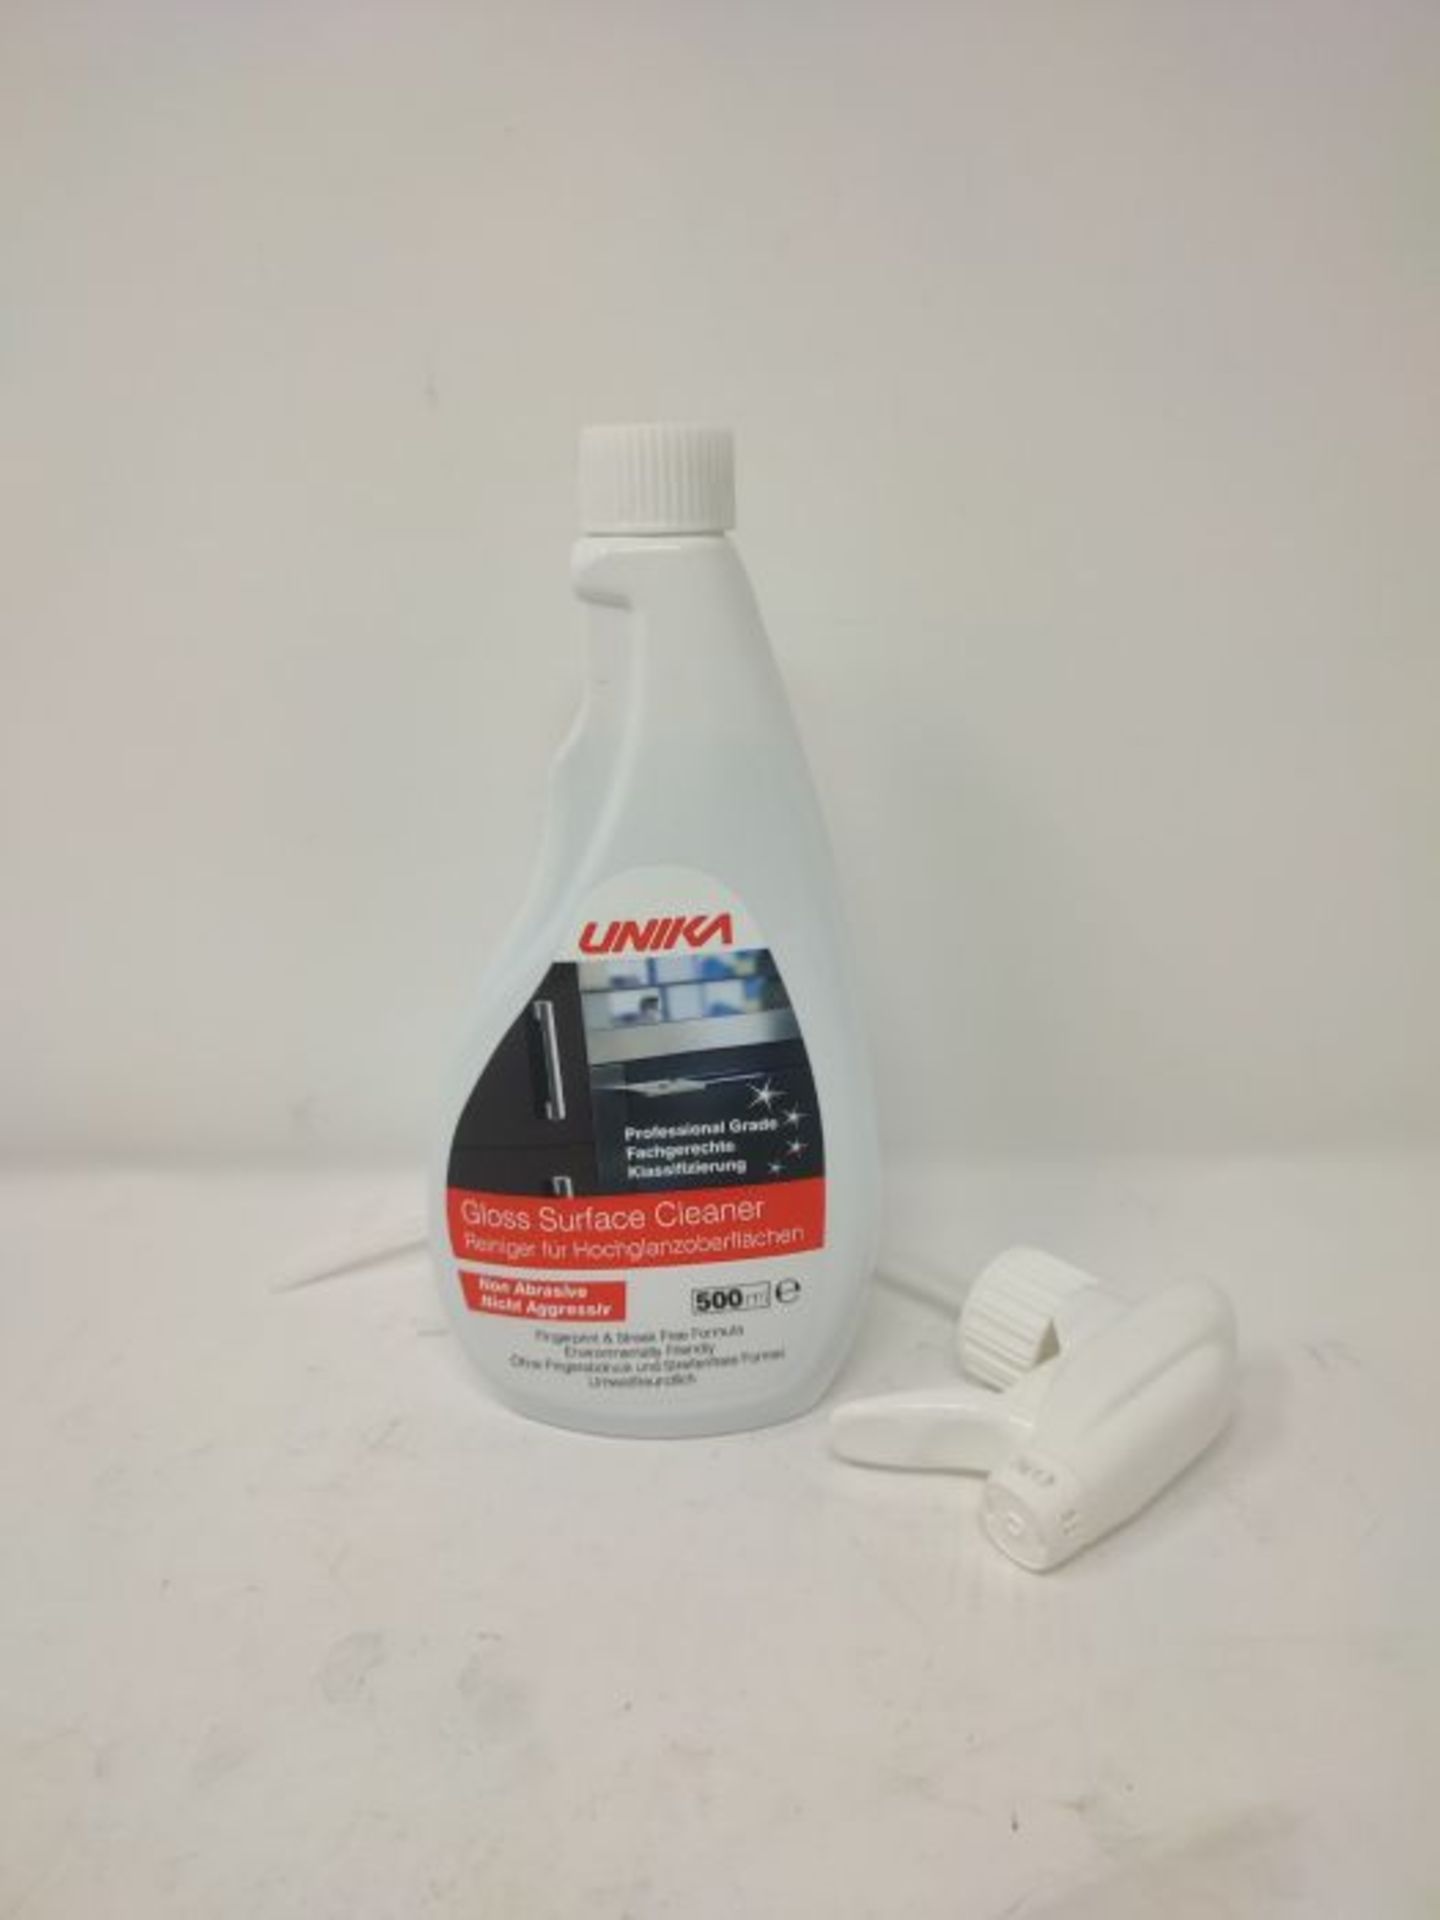 Unika CLEANGLOSSP500 Non-Aerosol Gloss Surface Cleaner & Microfibre Cloth 500ml - Image 2 of 4